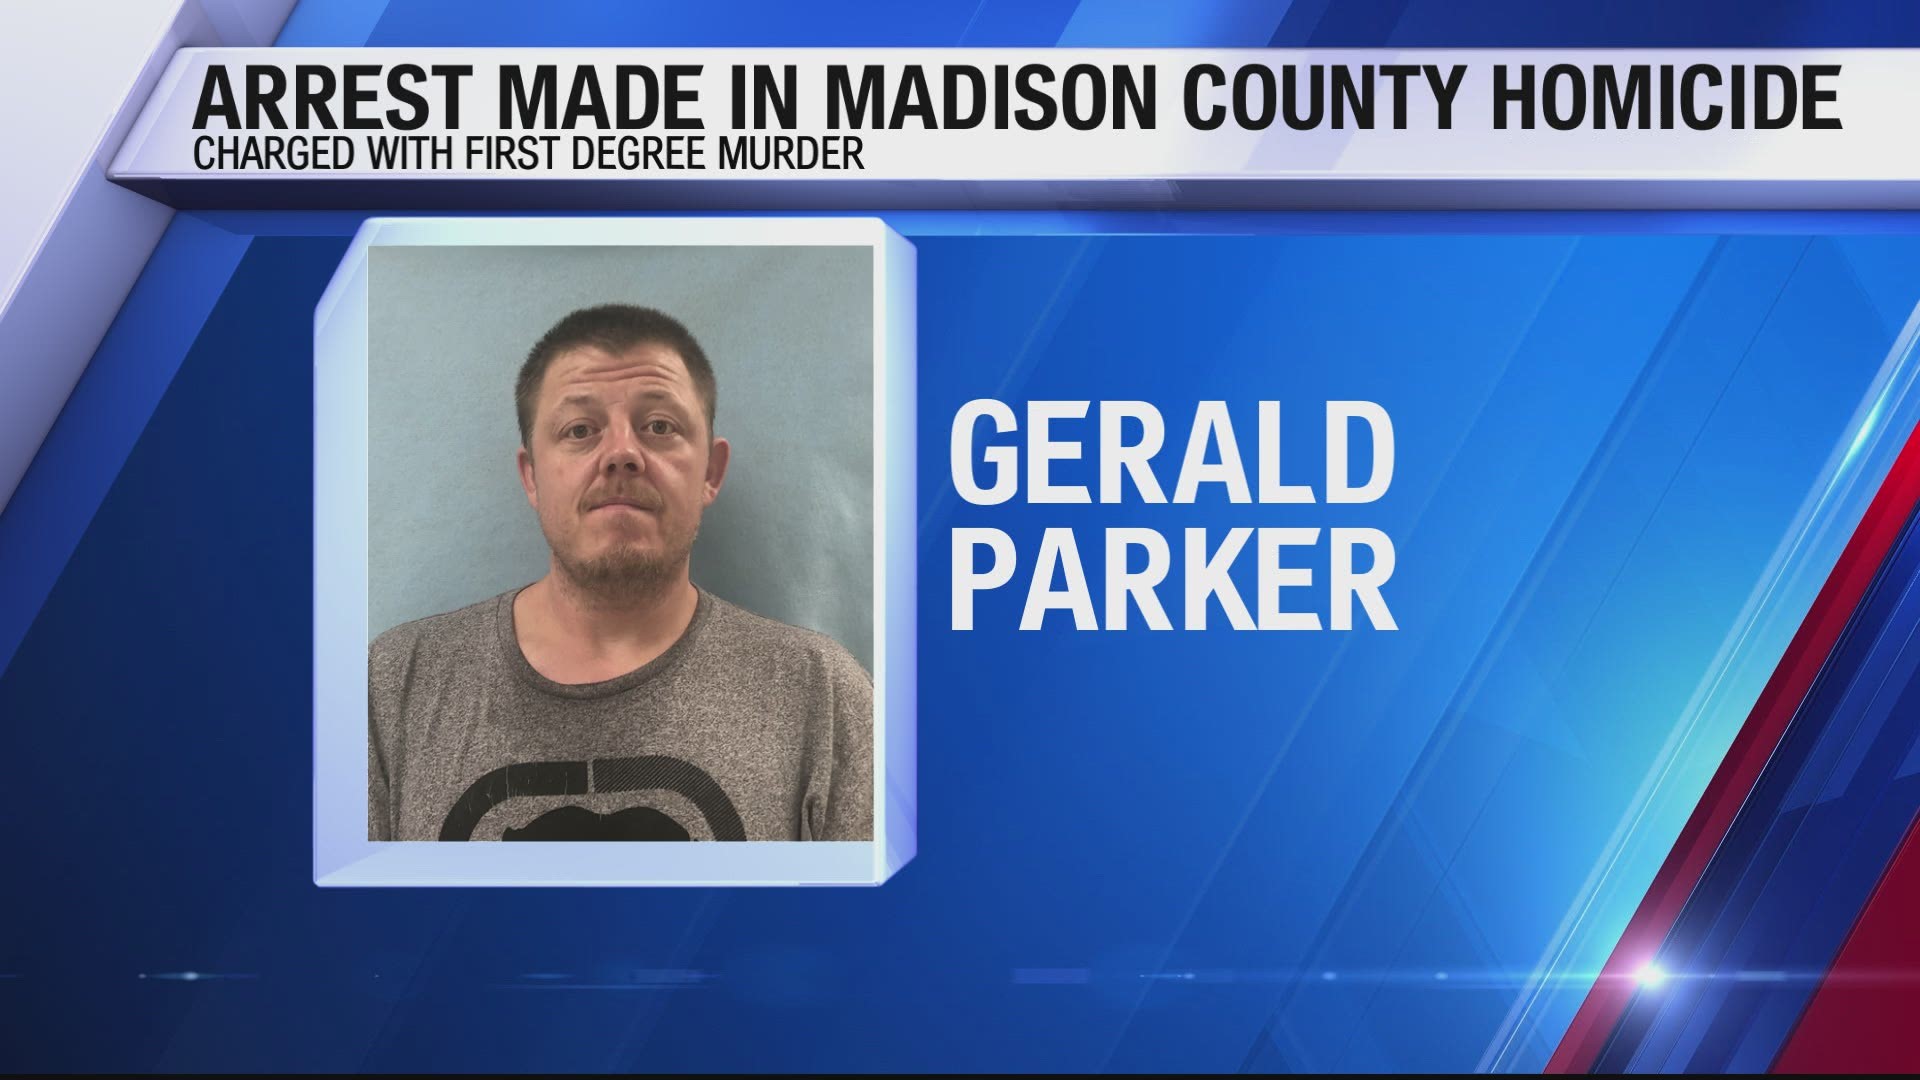 Gerald Parker was arrested Wednesday and charged with first degree murder according to the Madison County Sheriff's Office.